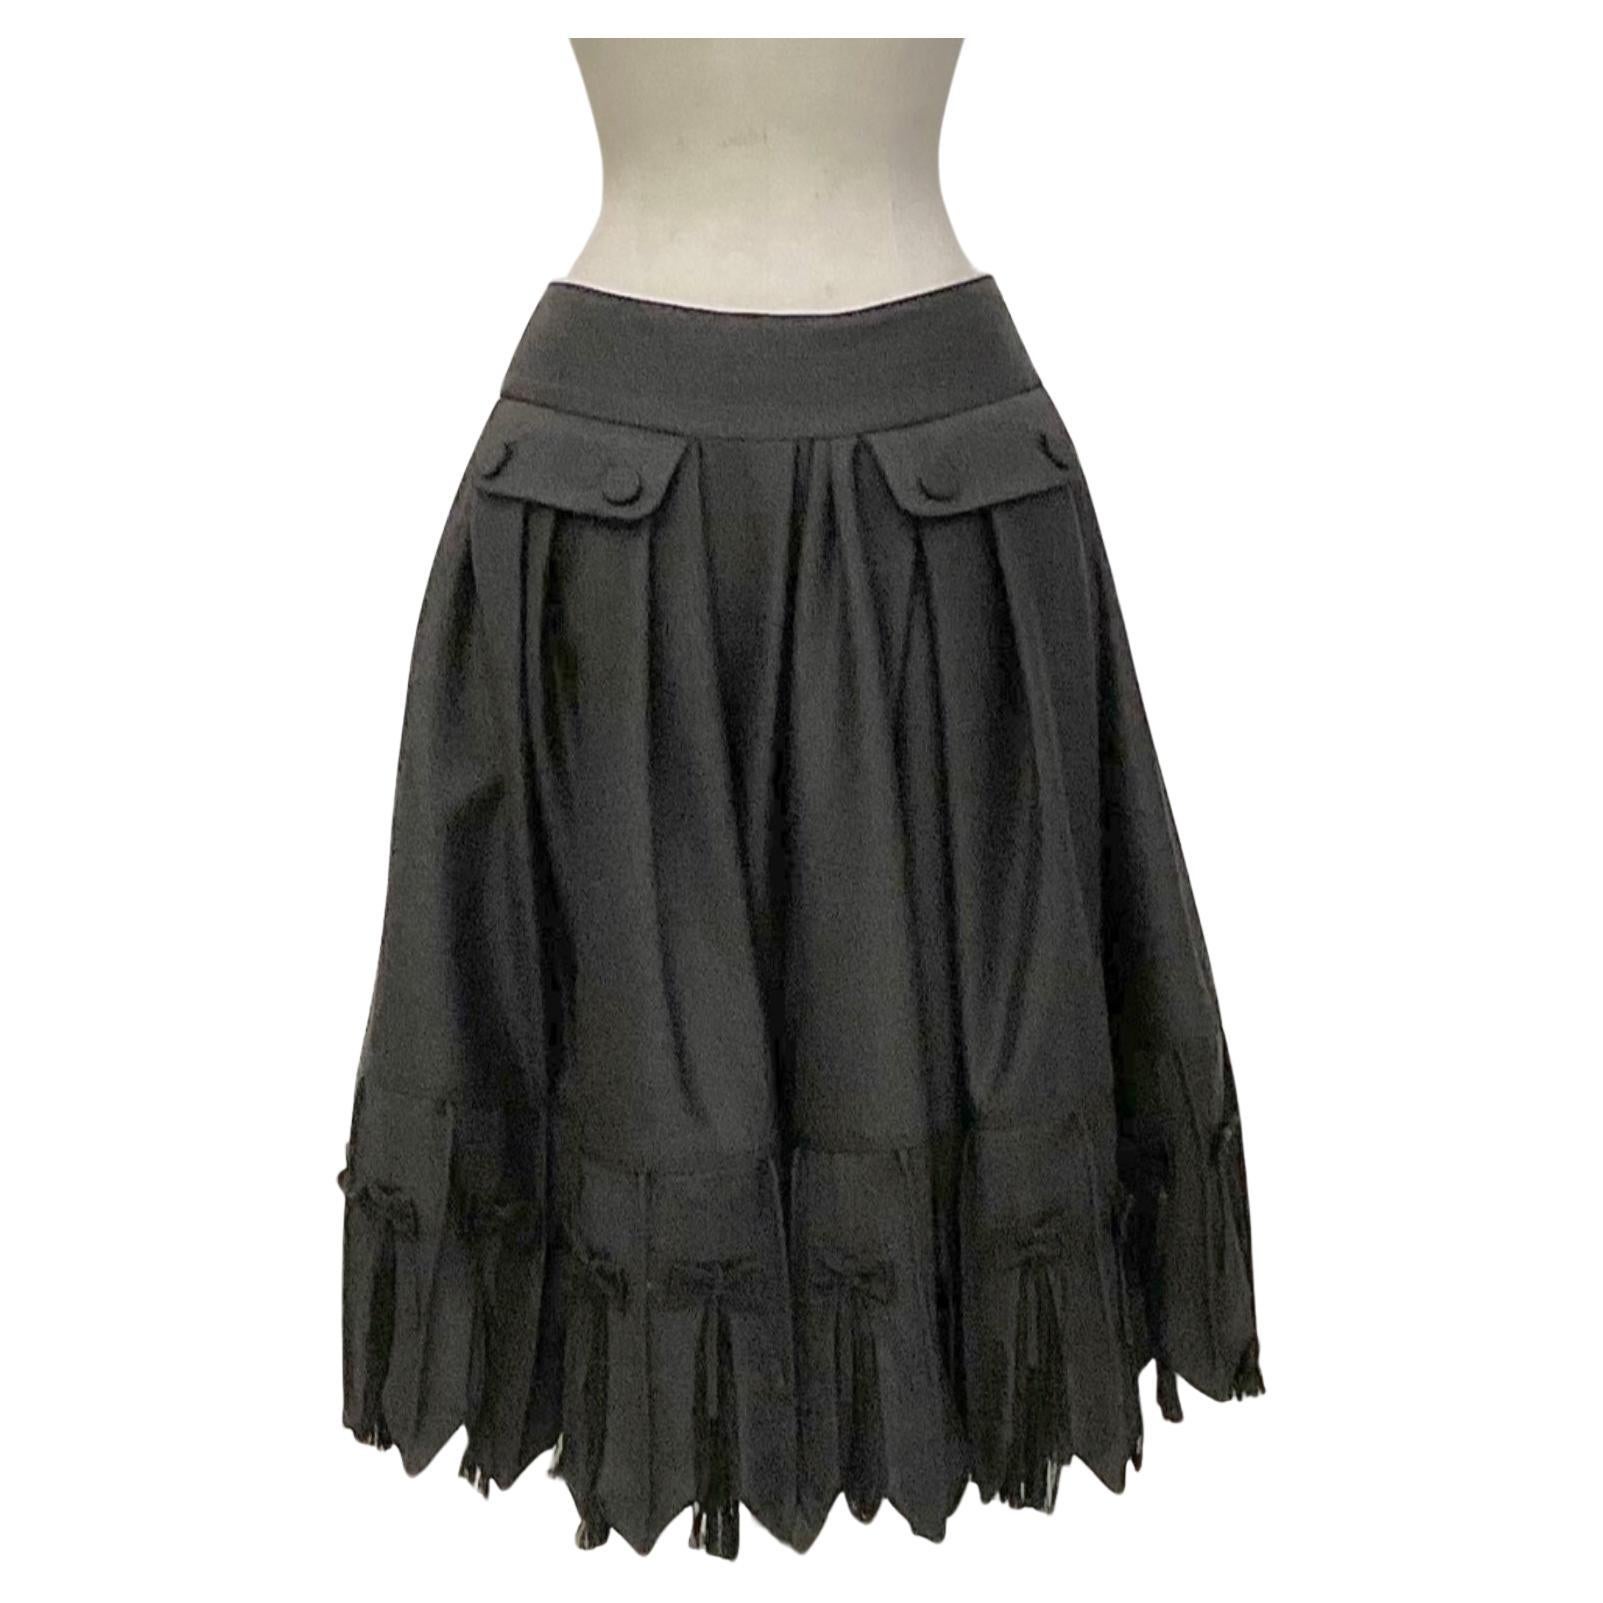 JOHN GALLIANO Wide pleated skirt in gray flannel from FW 2010 season For Sale